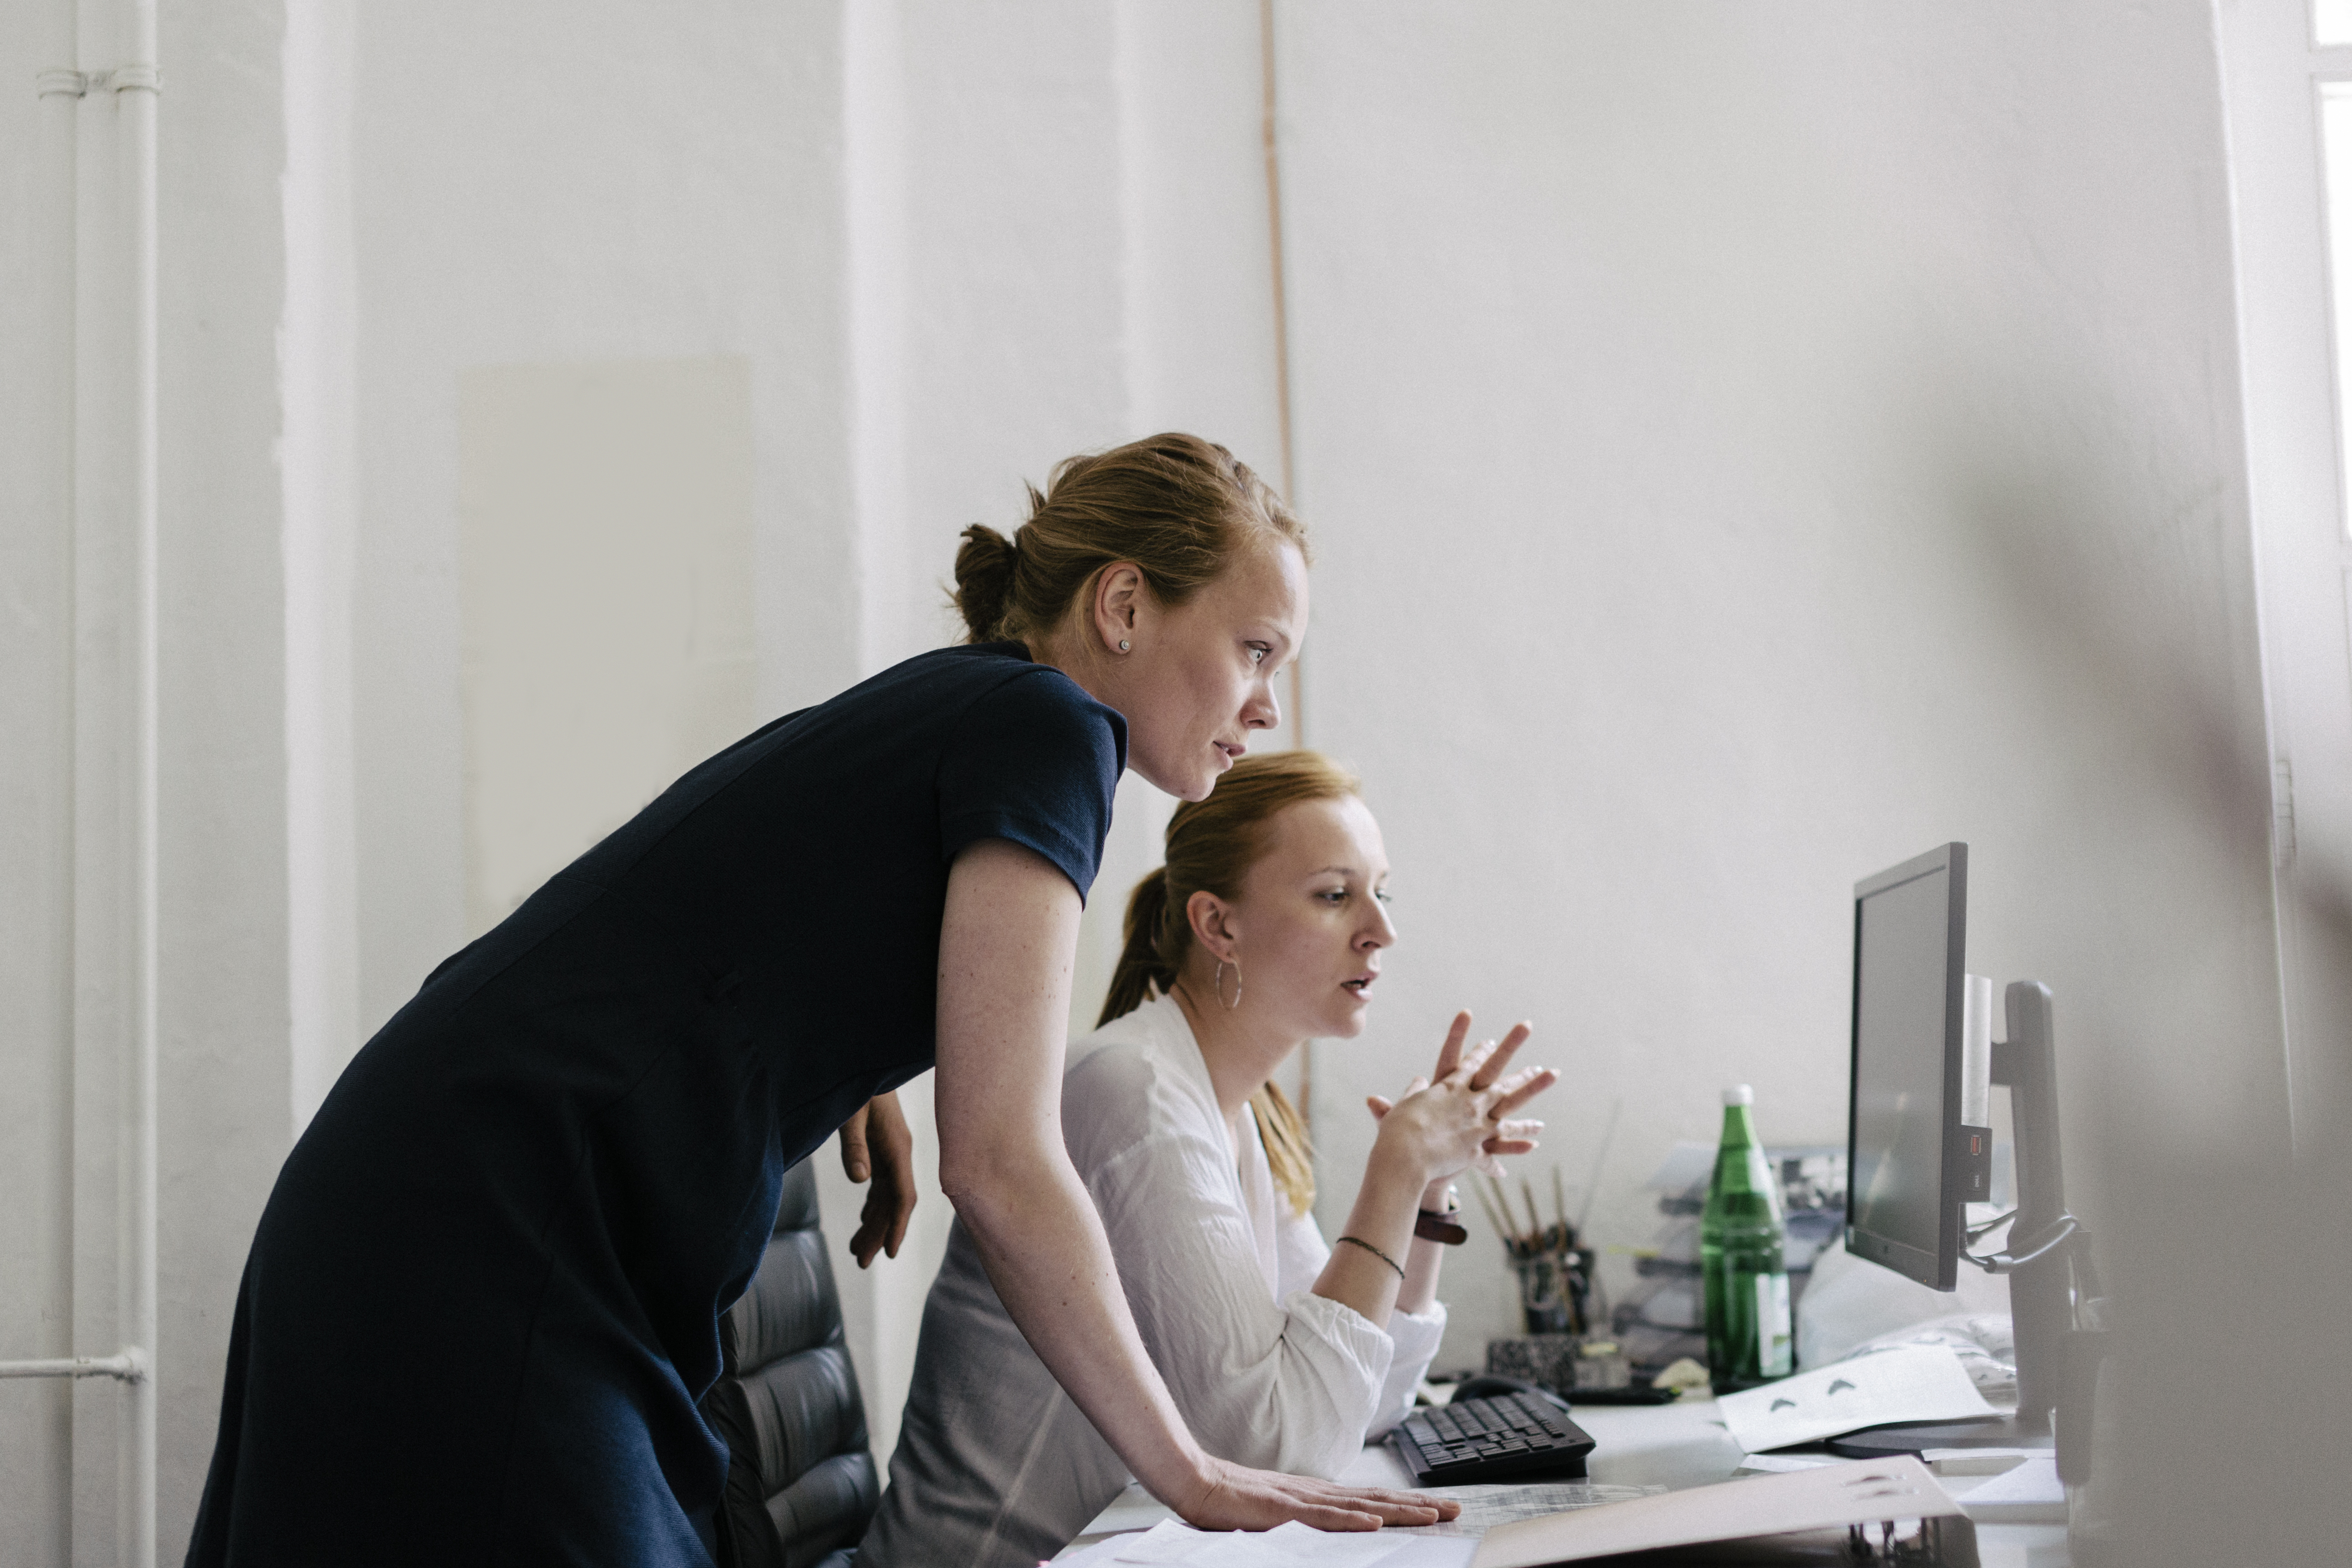 Two women working in an office. Both are leaning over a computer working as a team